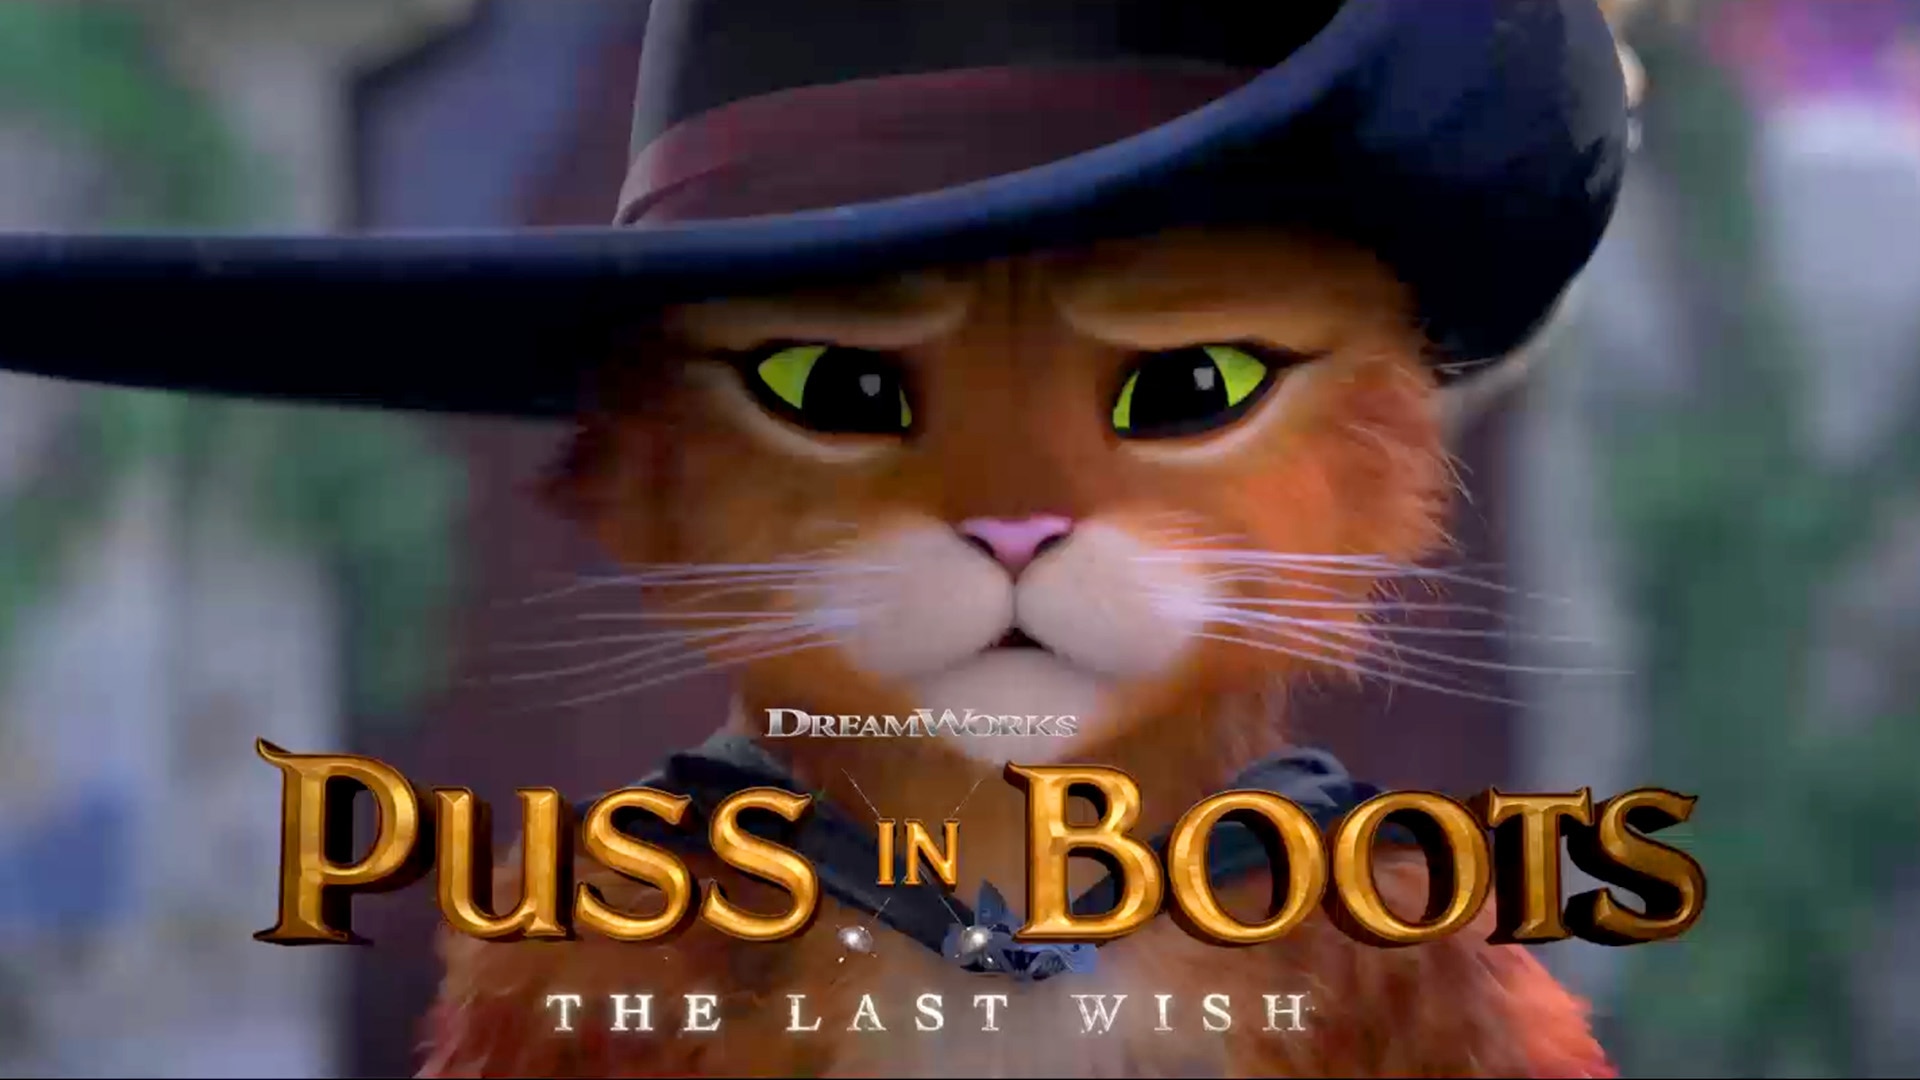 Watch NBC Trailer: Puss in Boots: The Last Wish